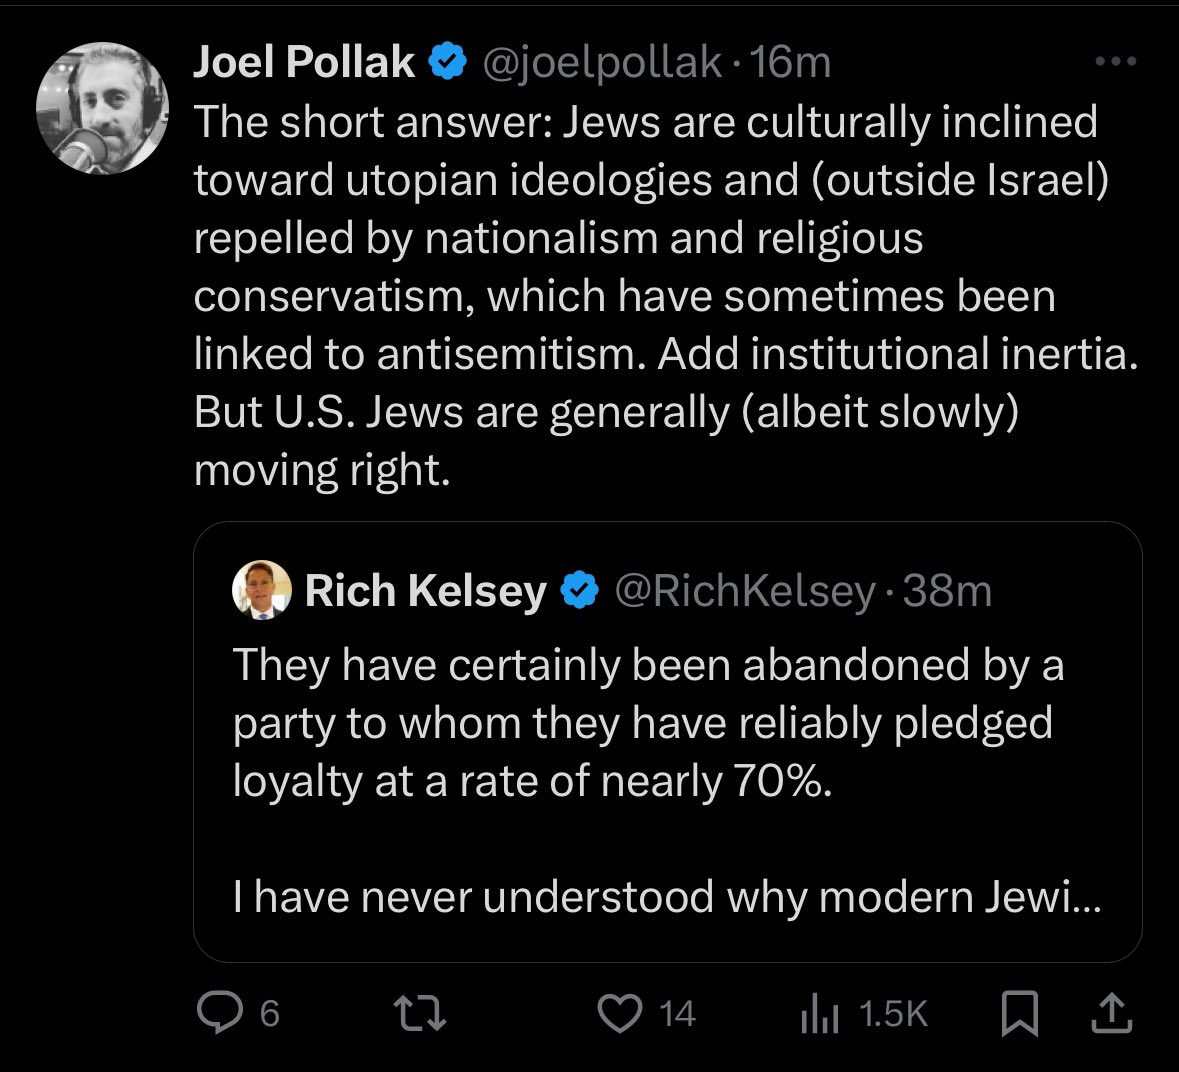 Jewish Breitbart editor Joel Pollak EXPOSES the Jewish people as opponents of religious conservatism